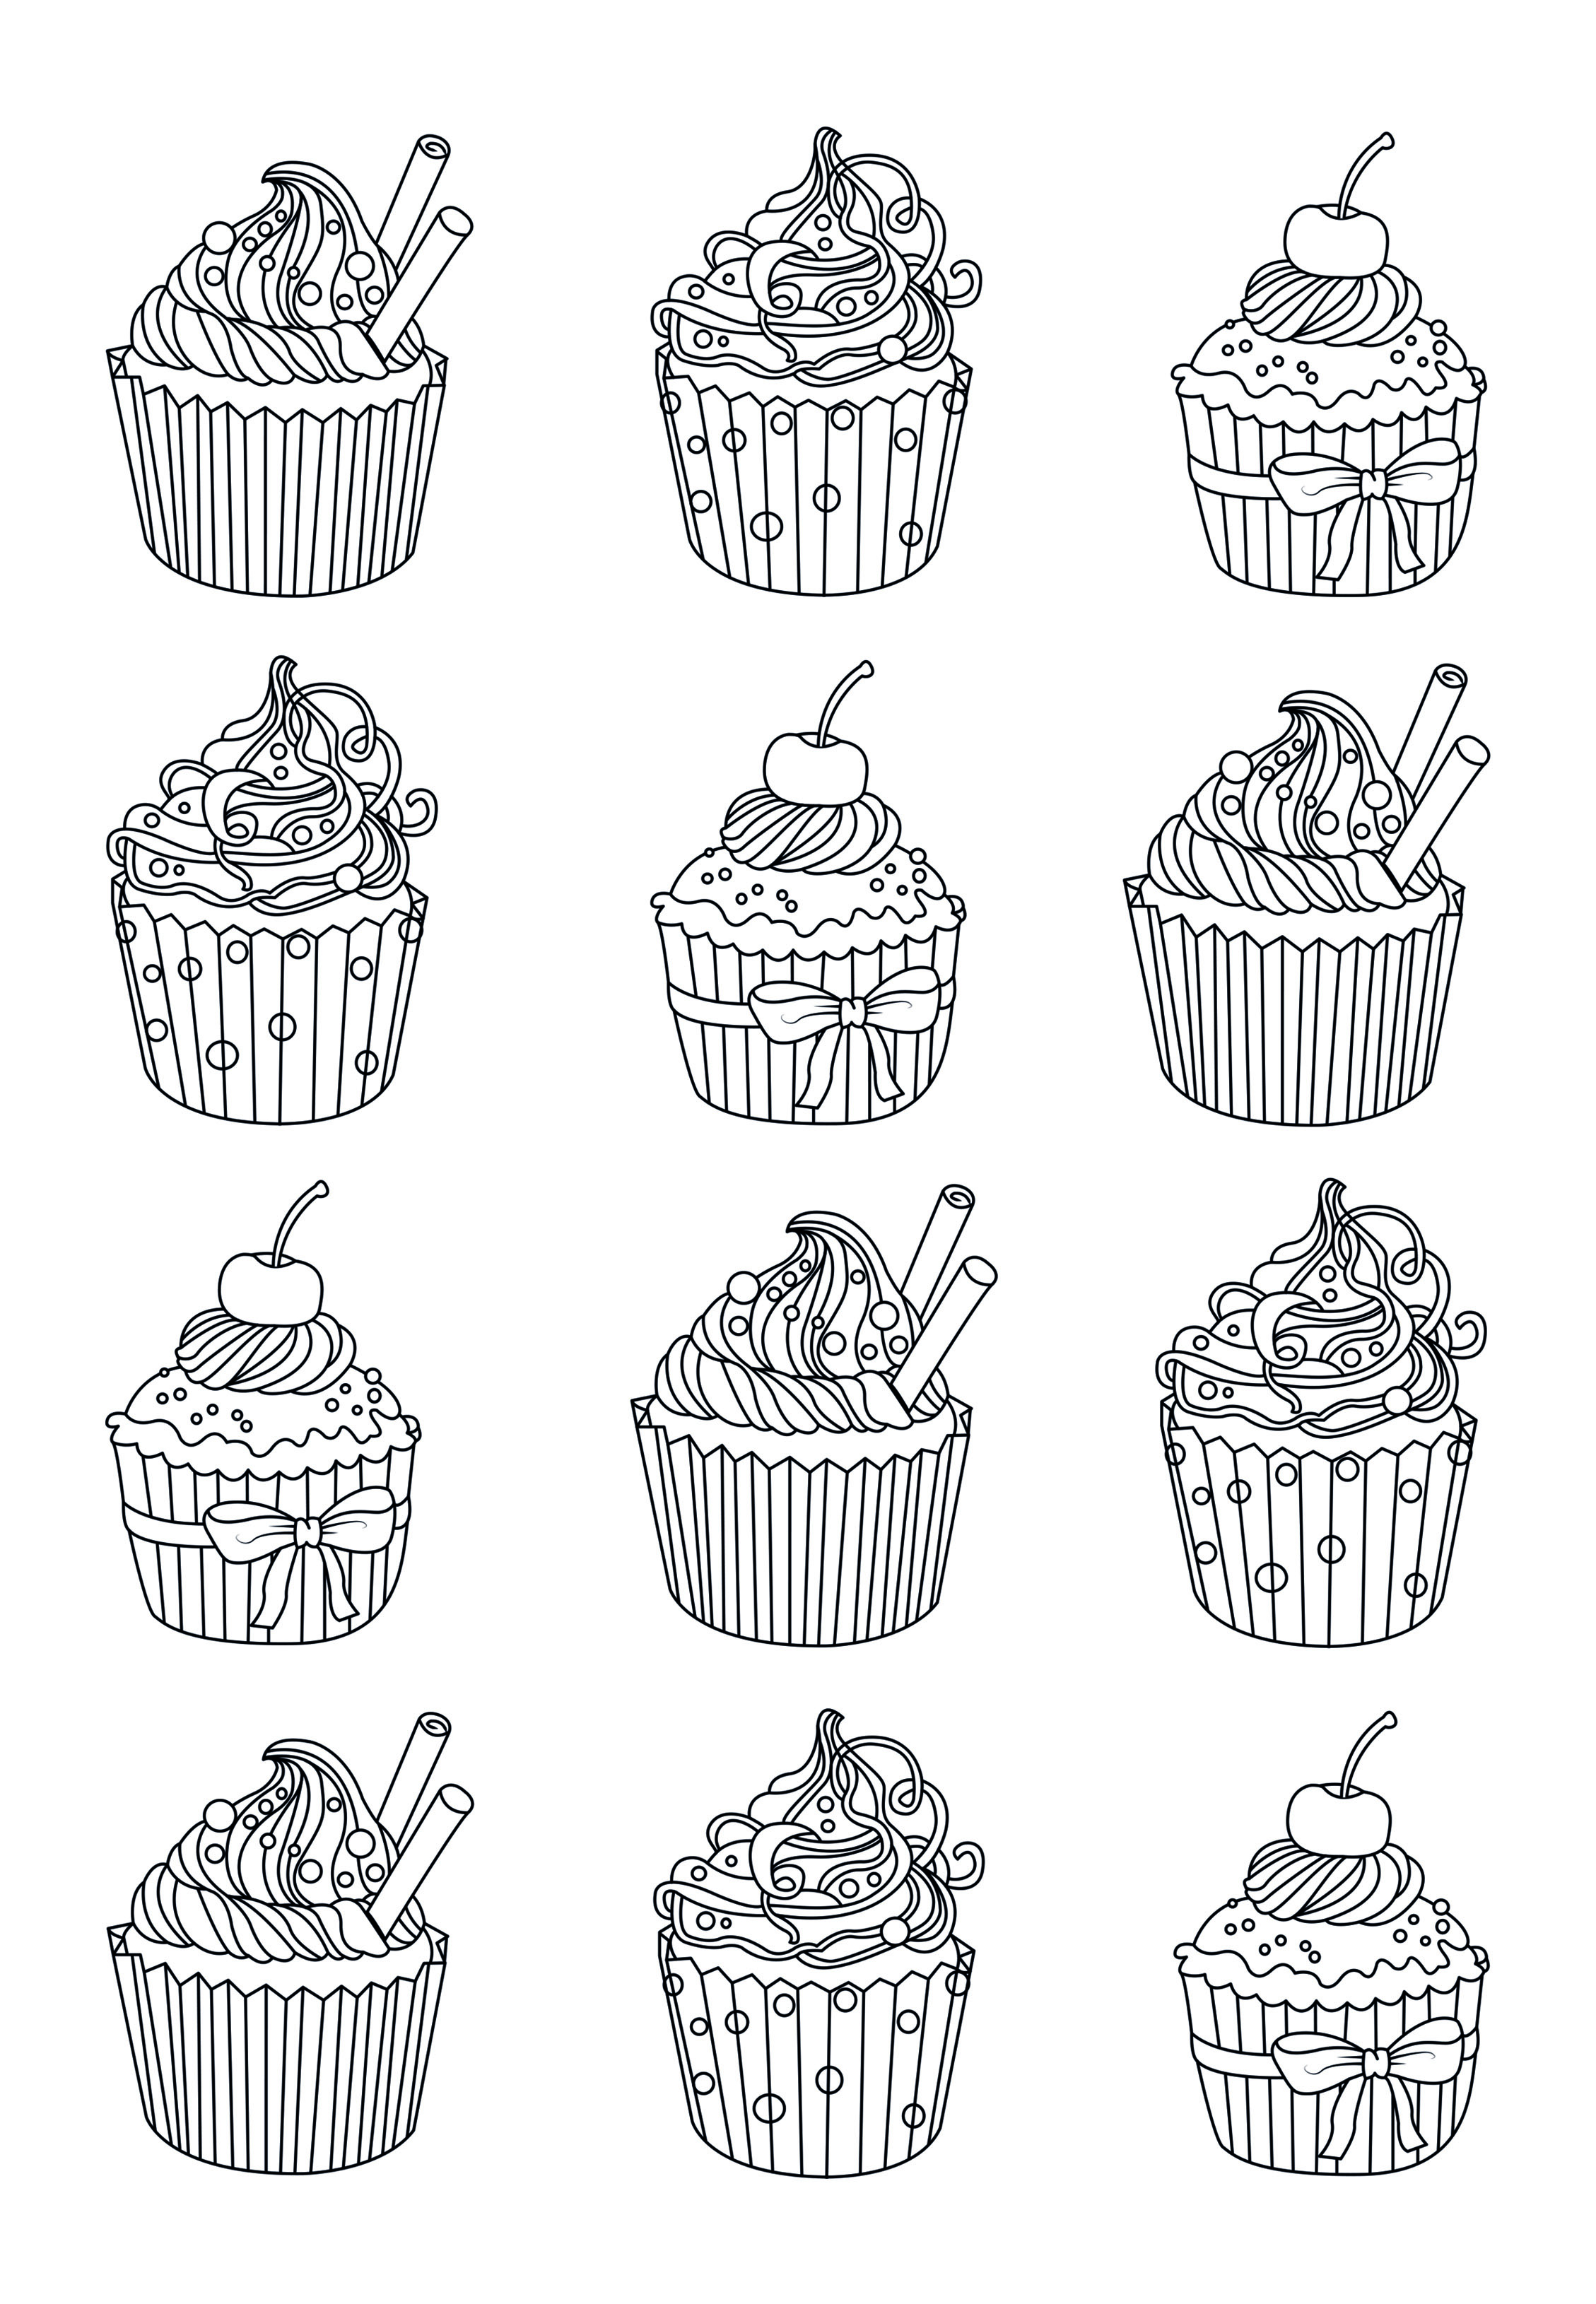 Cup cakes 58689